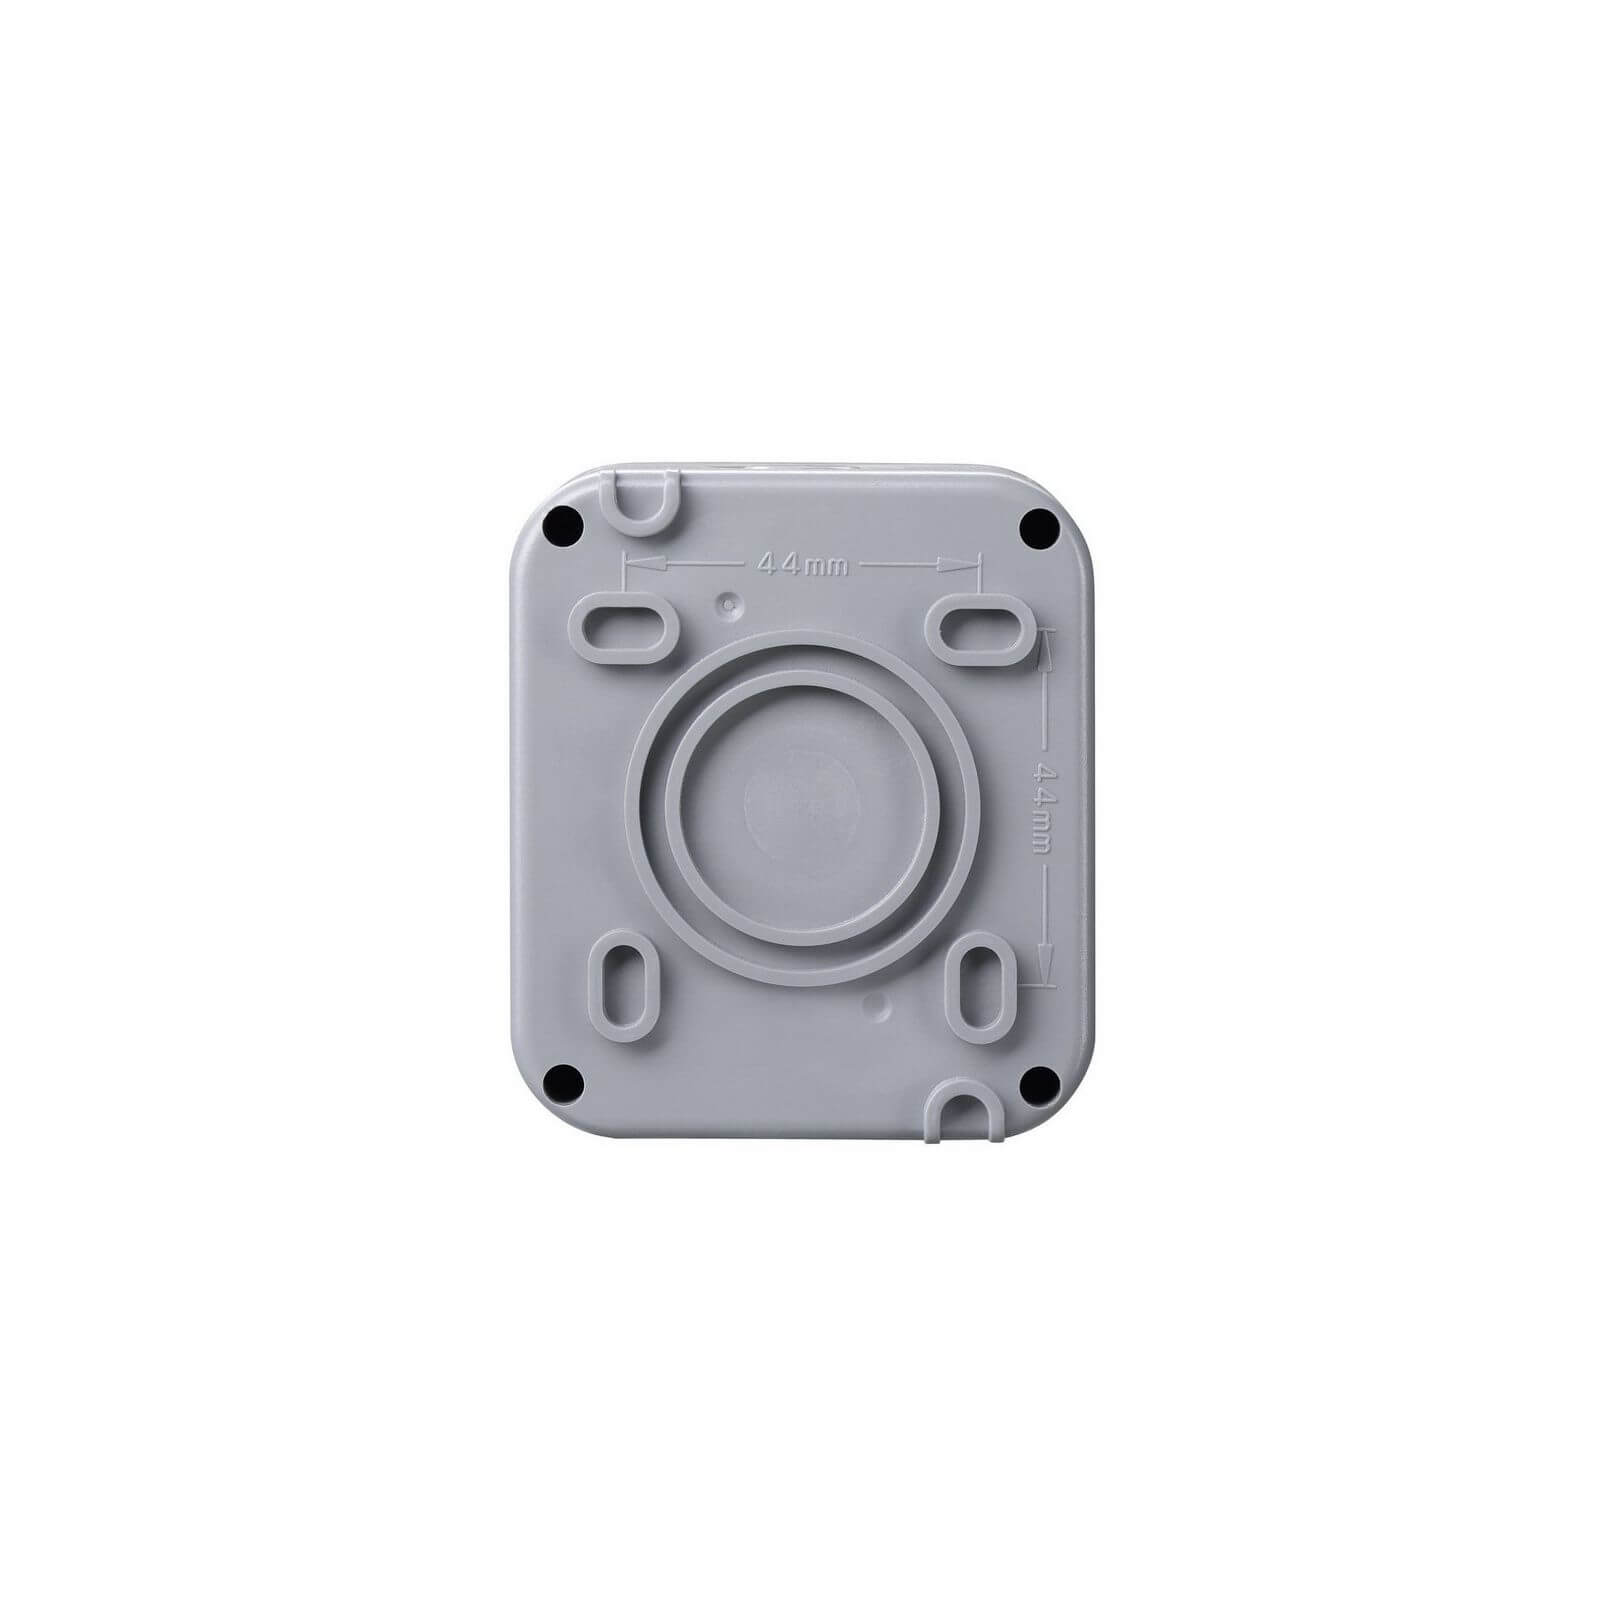 BG 13 Amp 1 Gang Unswitched Weatherproof Socket IP55 Rated Grey